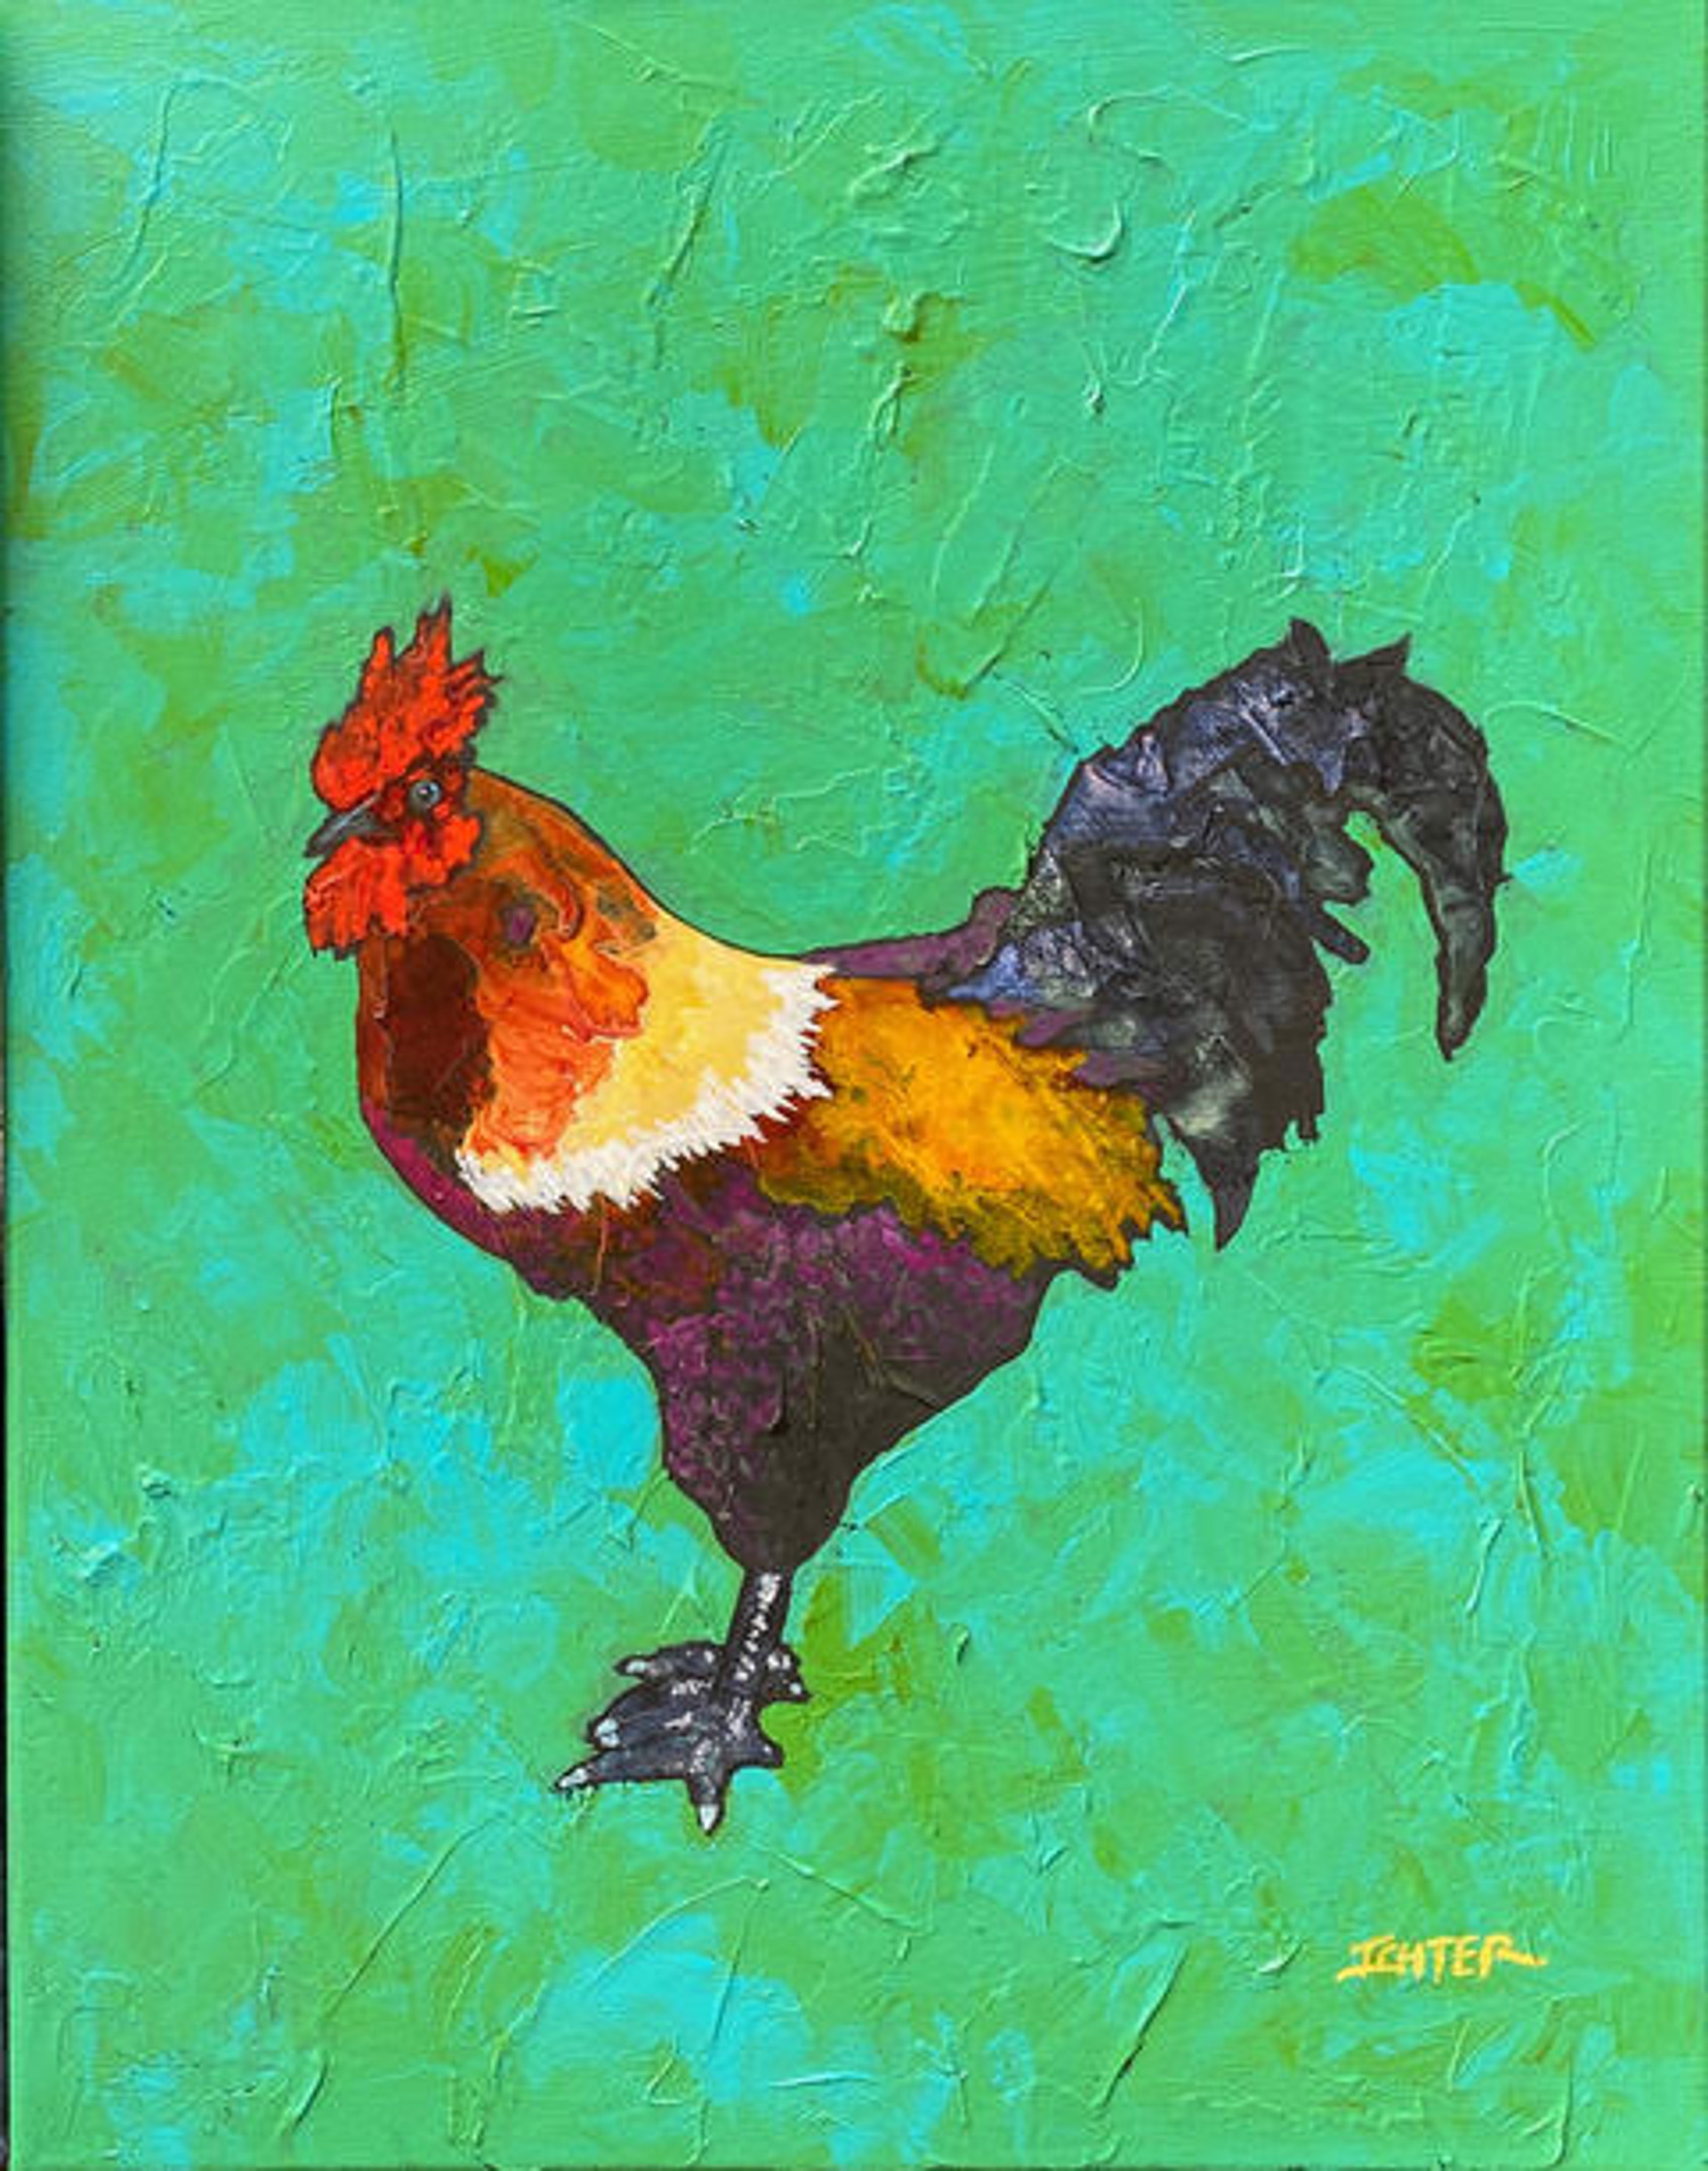 Wild Rooster Of Key West by R. John Ichter